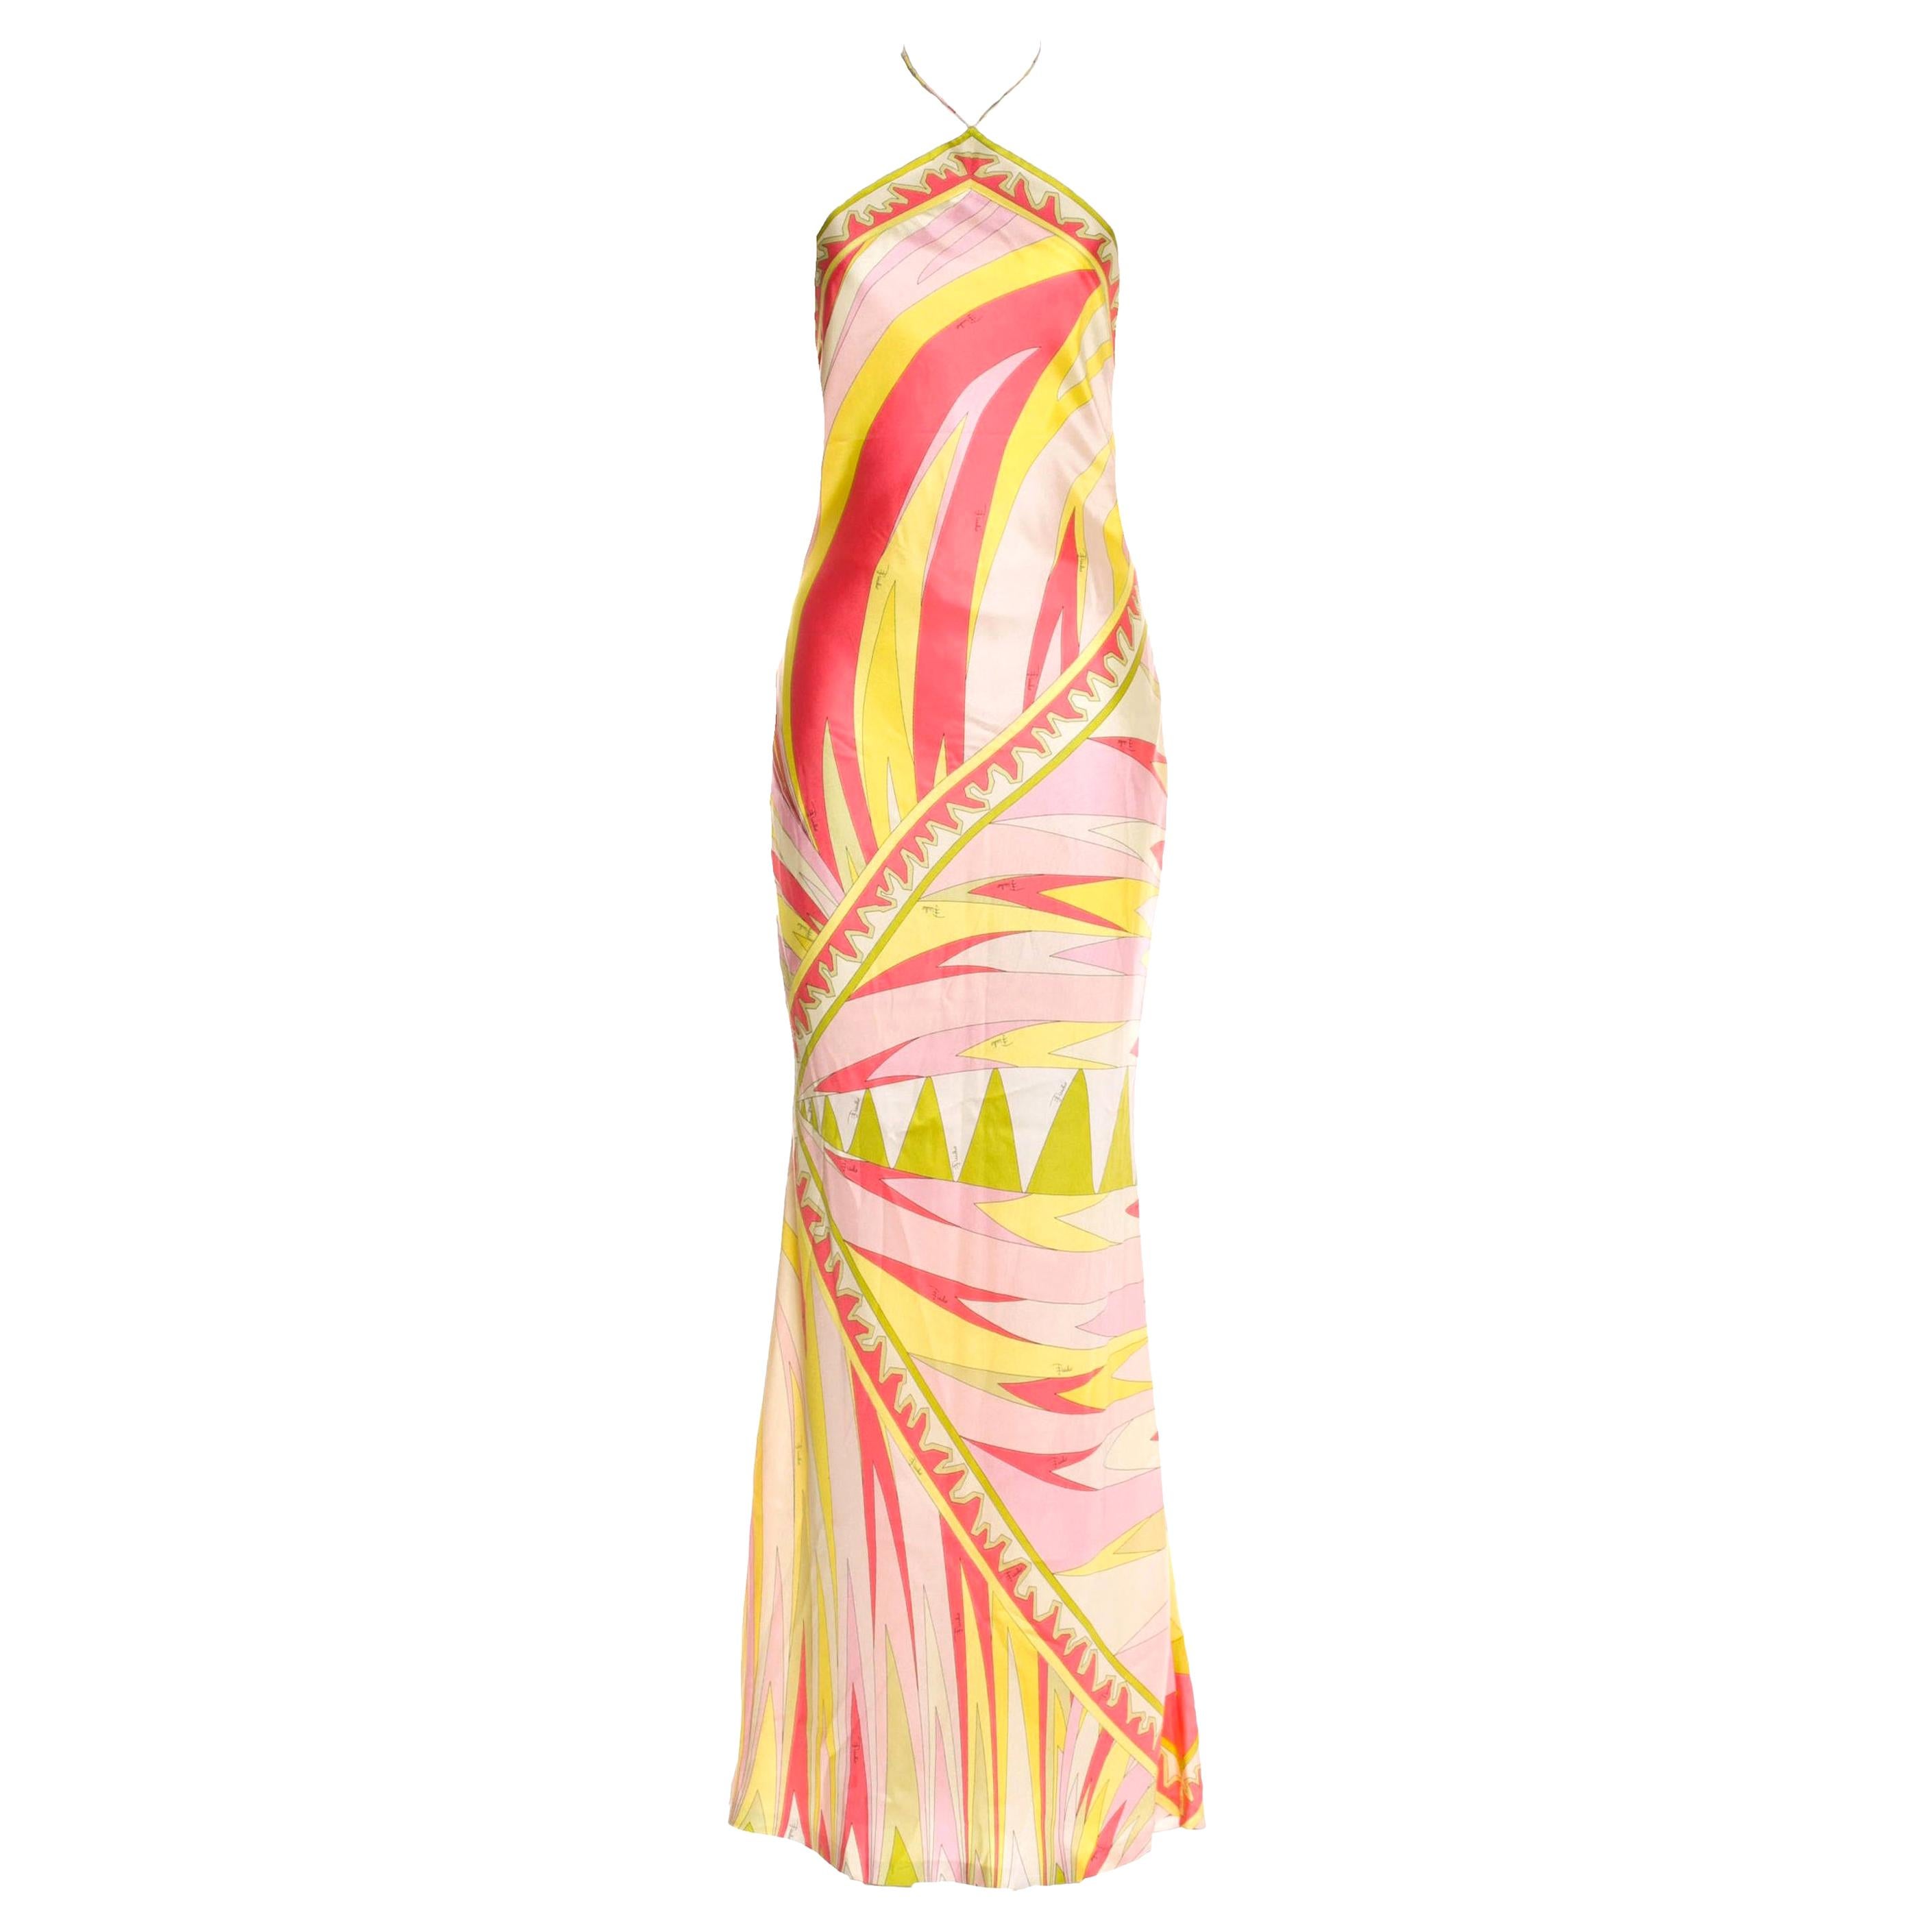 Emilio Pucci Signature Print Neckholder Evening Maxi Dress Gown as seen on JLO